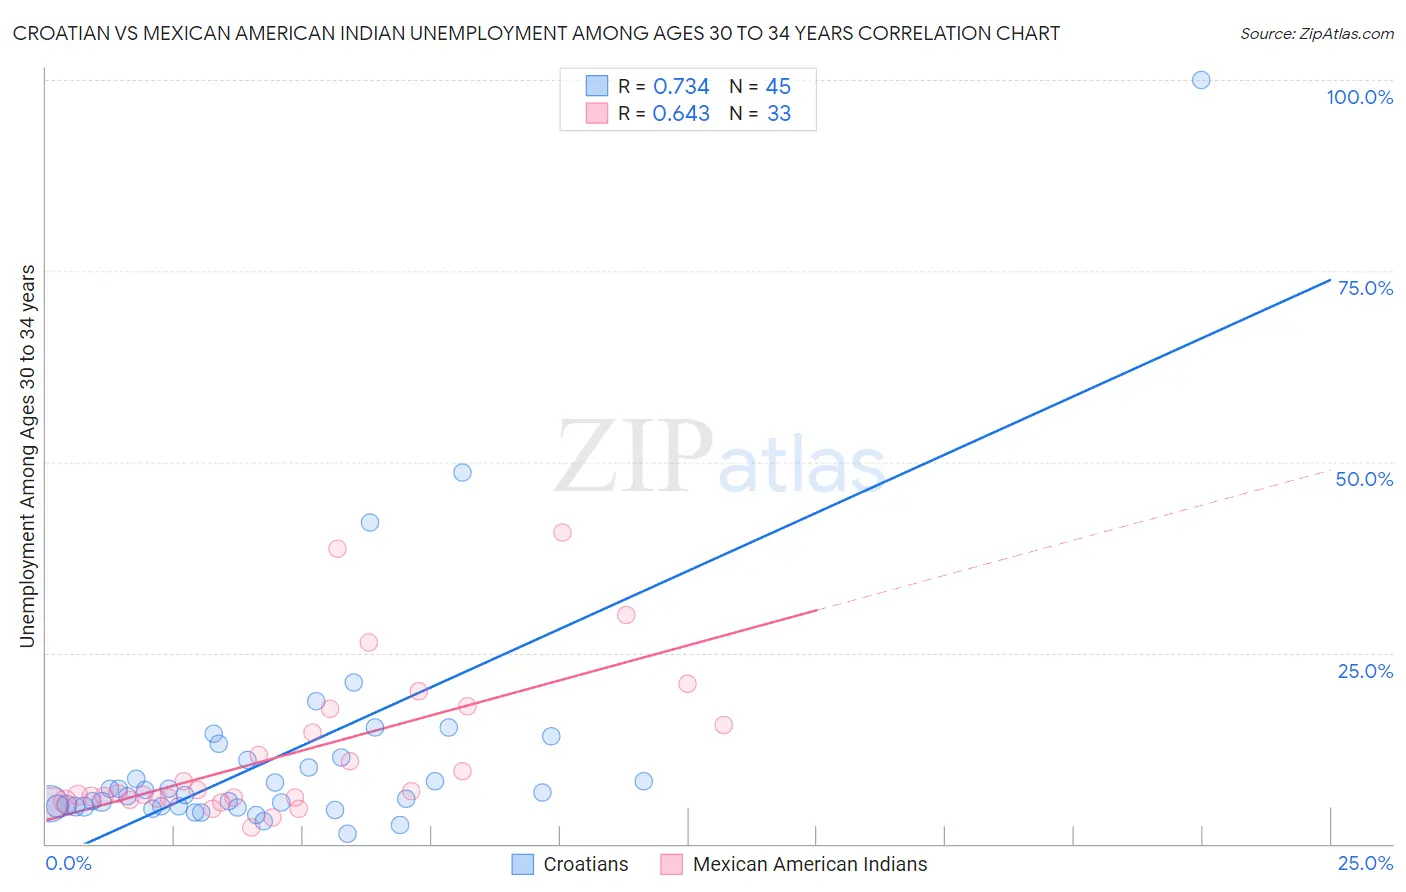 Croatian vs Mexican American Indian Unemployment Among Ages 30 to 34 years